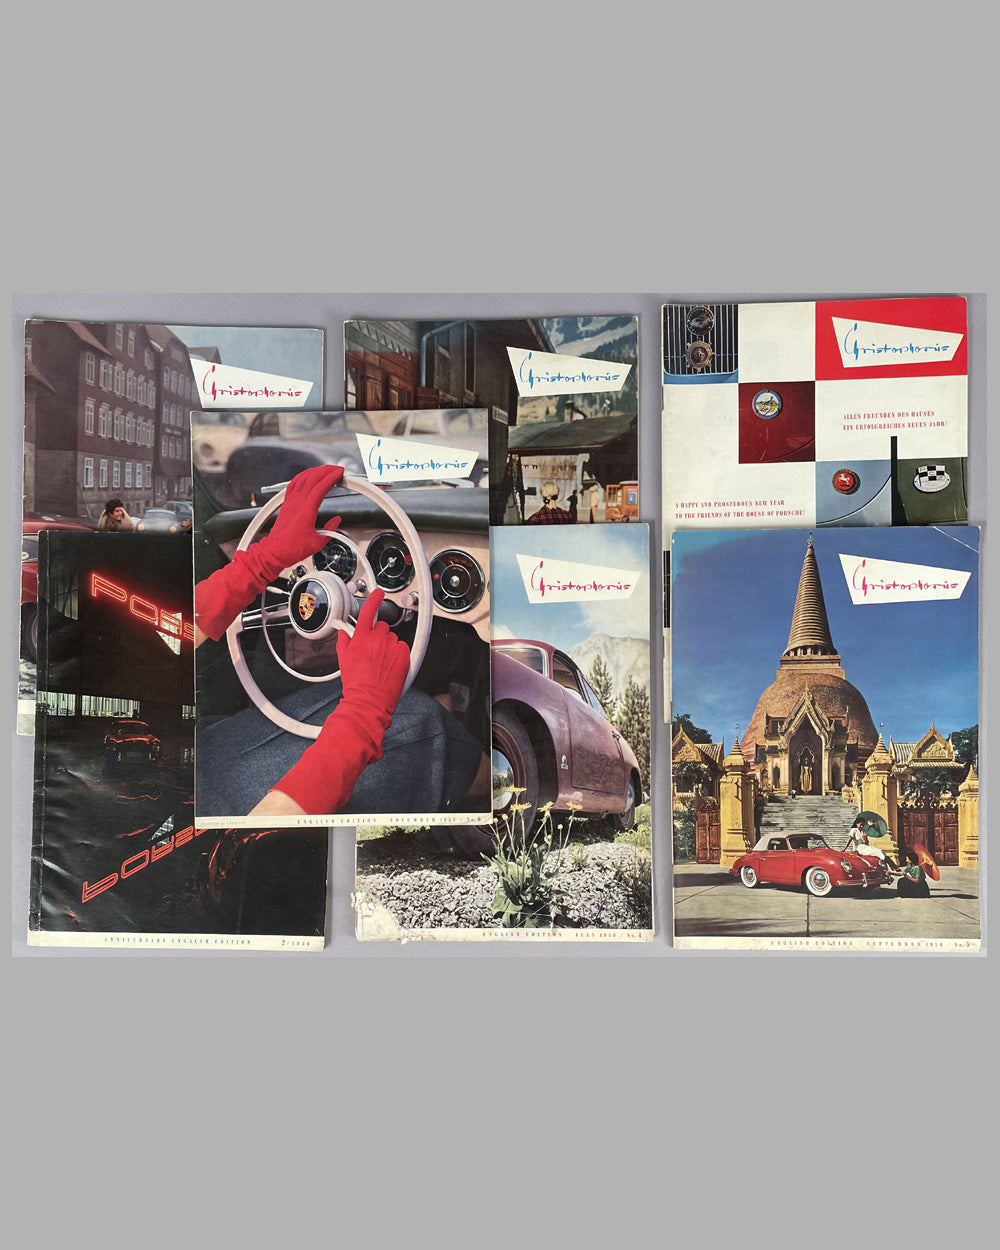 Collection of the first 7 Christophorus magazines, 1956 from the Porsche  factory - l'art et l'automobile